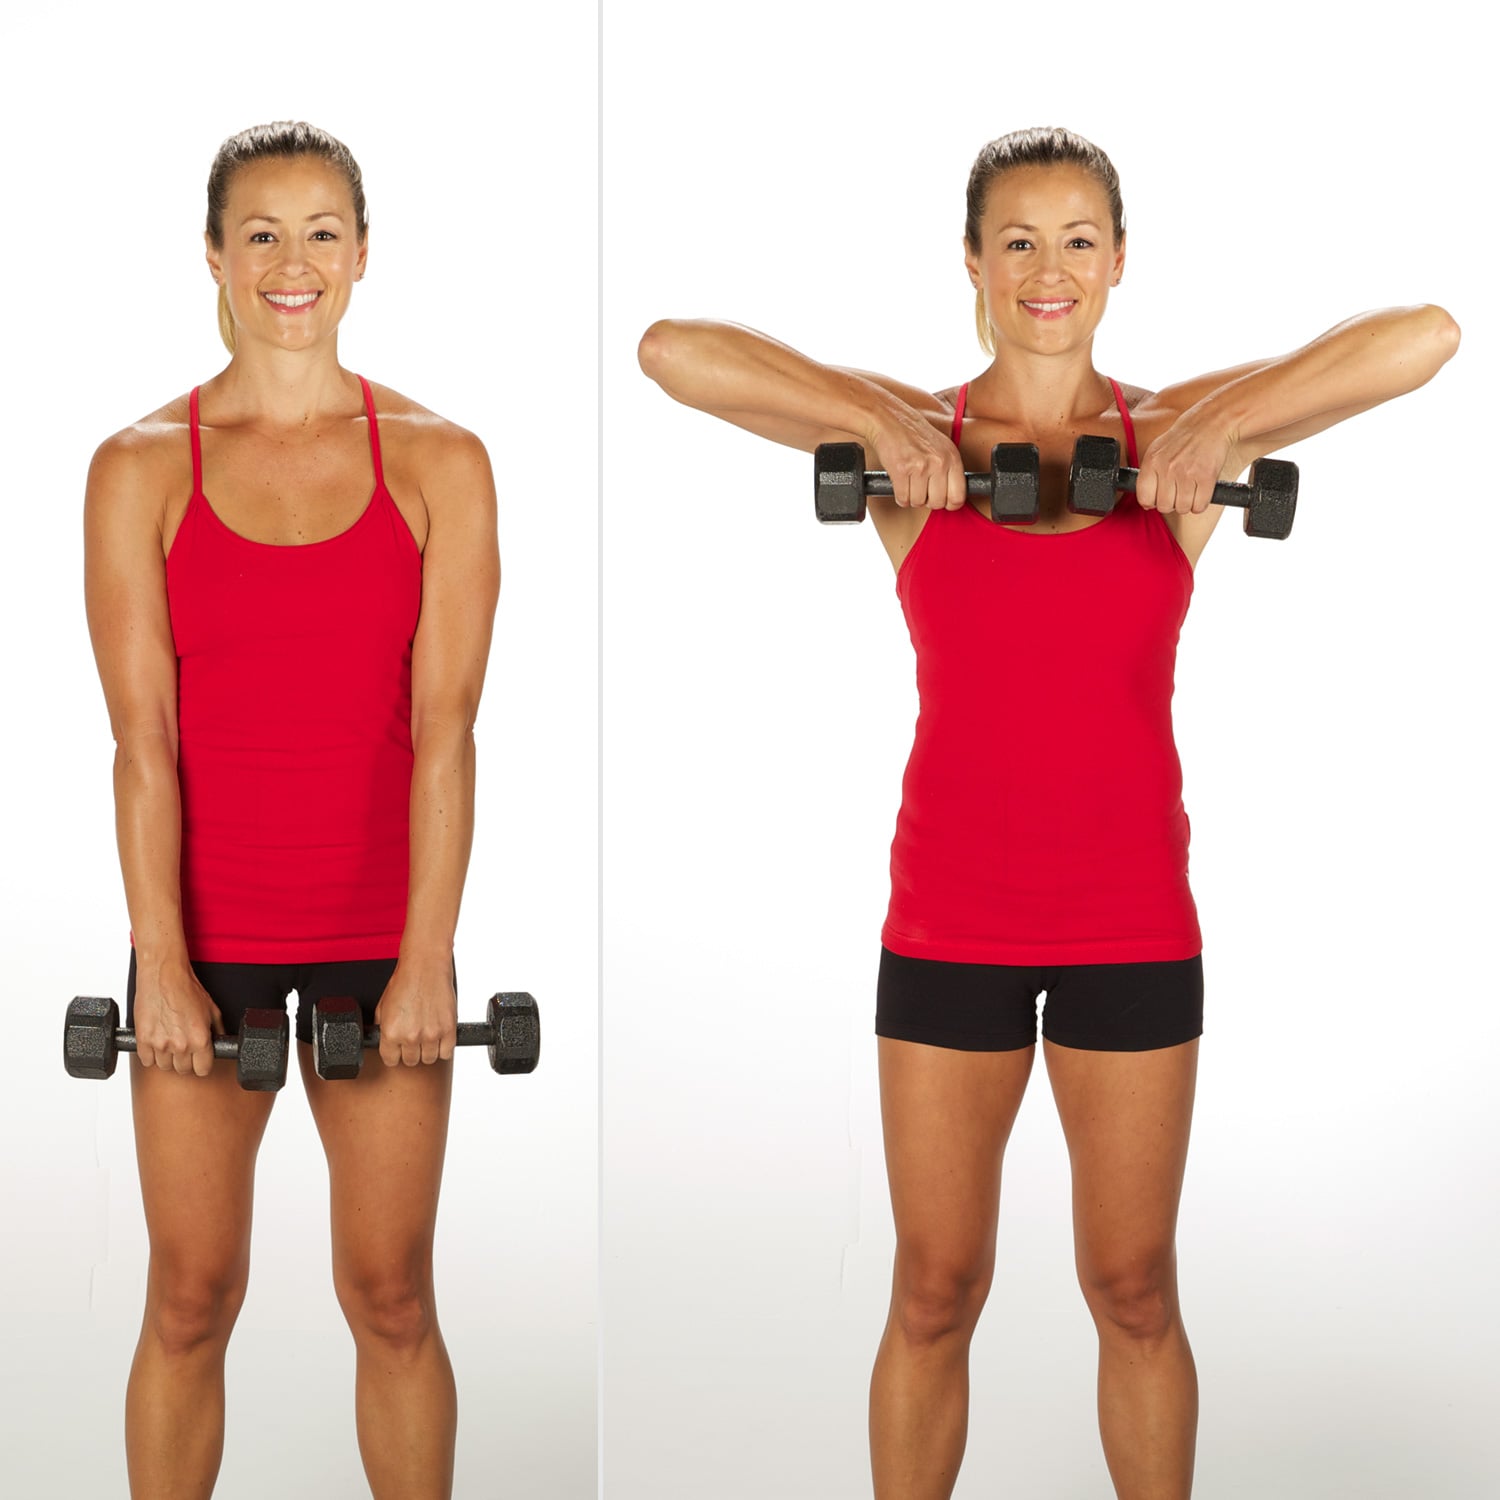 Upright Row | Sculpt and Strengthen Your Arms With This 3-Week Dumbbell Challenge | POPSUGAR Fitness Photo 5